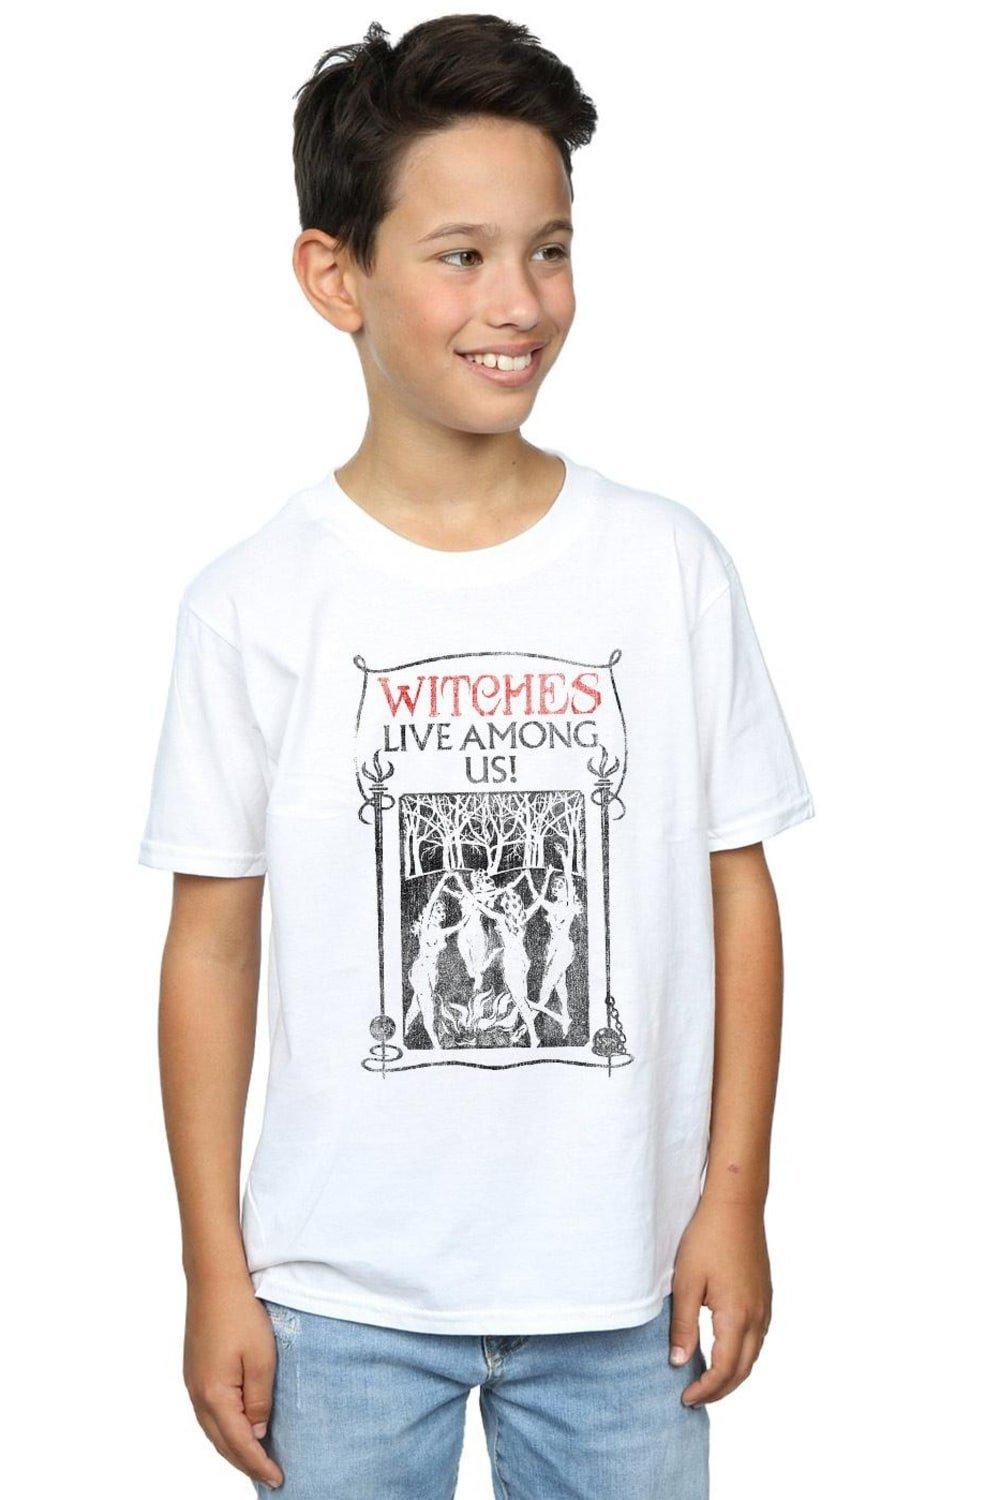 Witches Live Among Us T-Shirt